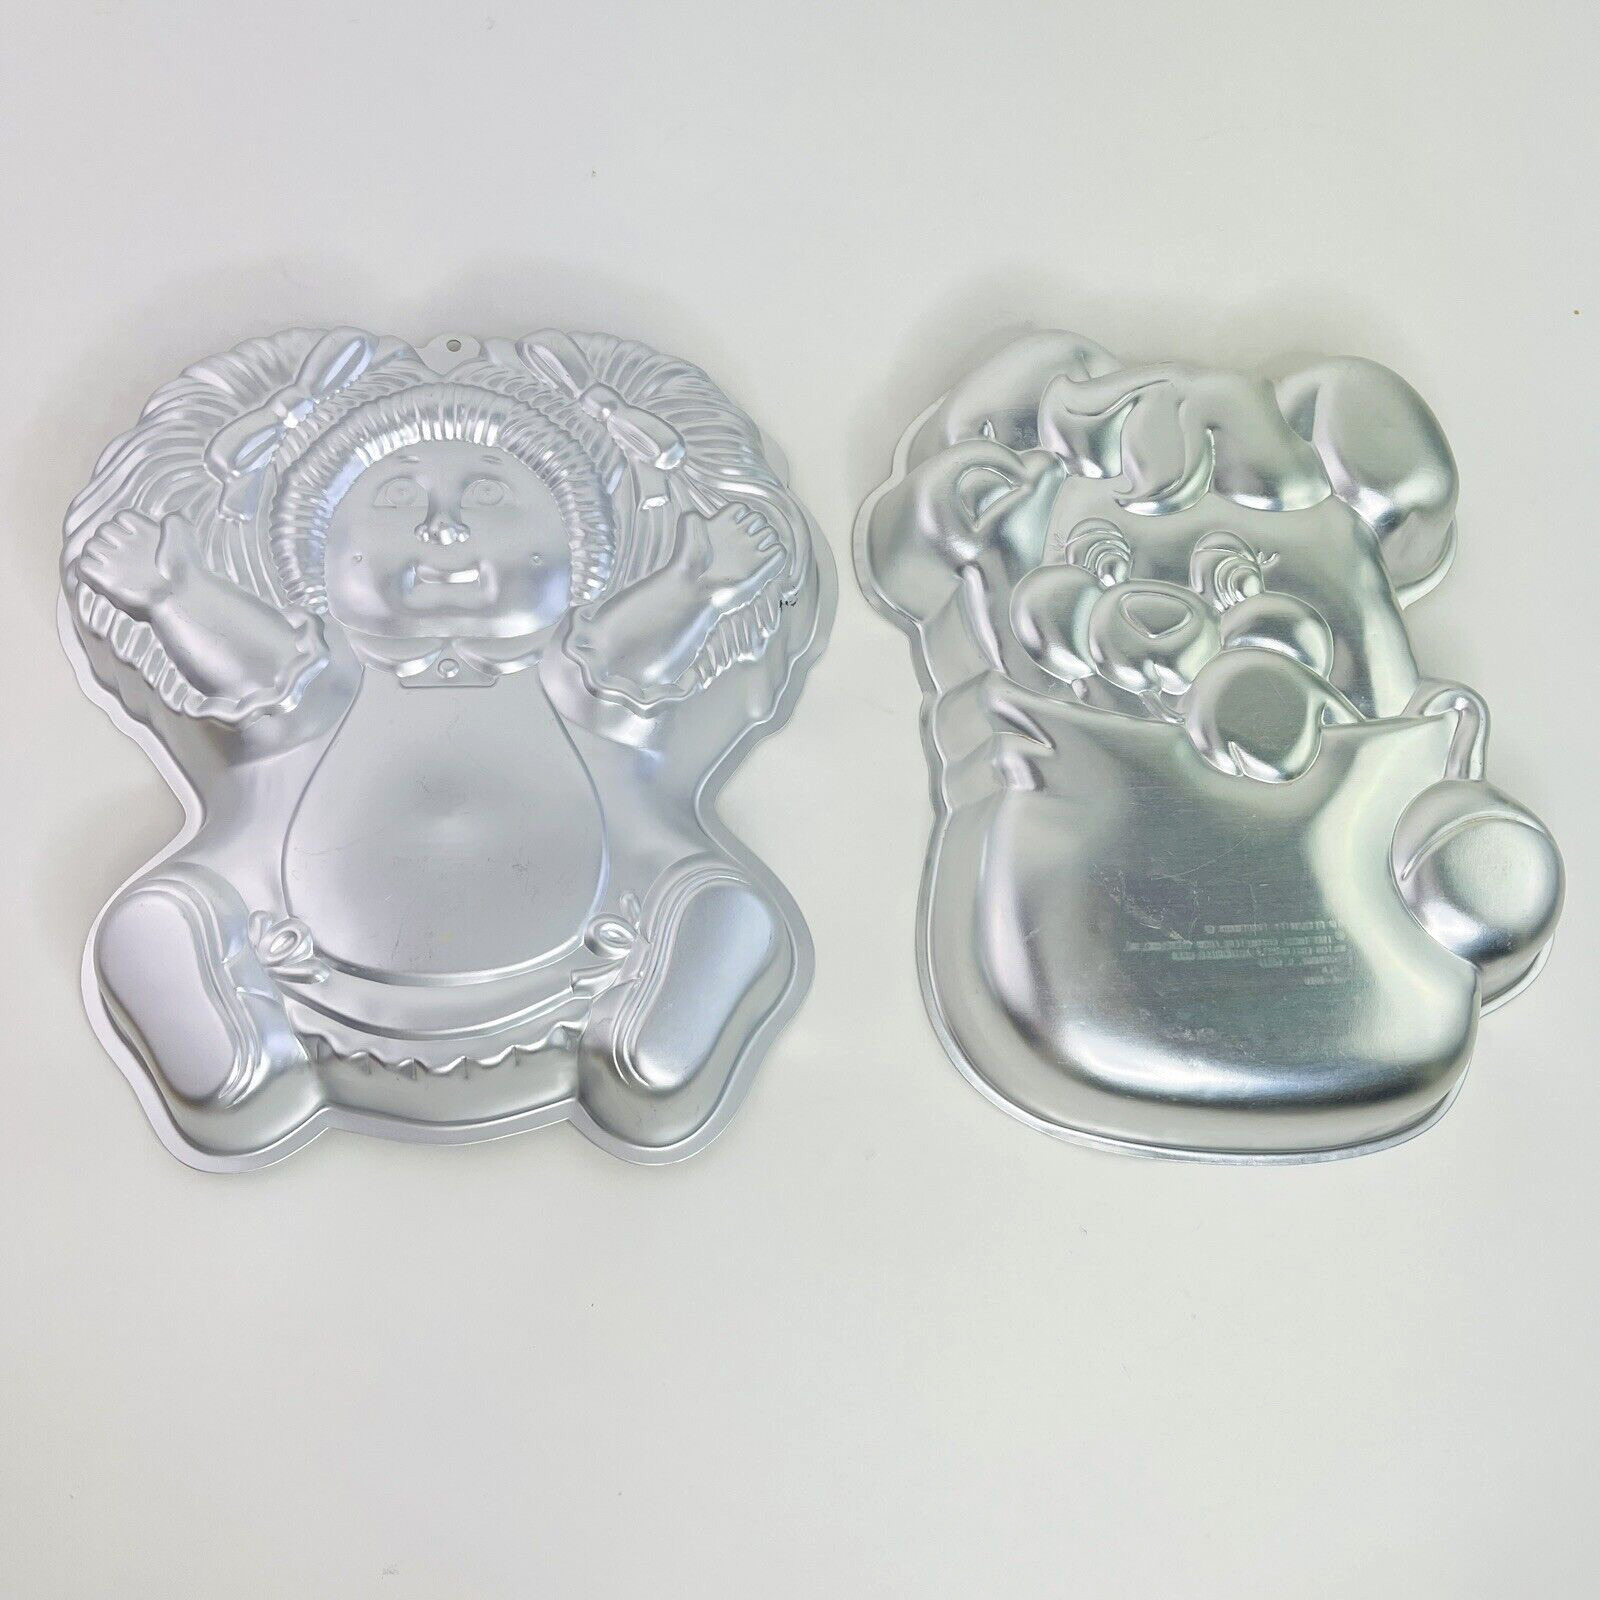 Lot of 2 Vintage Wilton Cake Pans Cabbage Patch Kids 2105-1984 Poppies 2105-2056